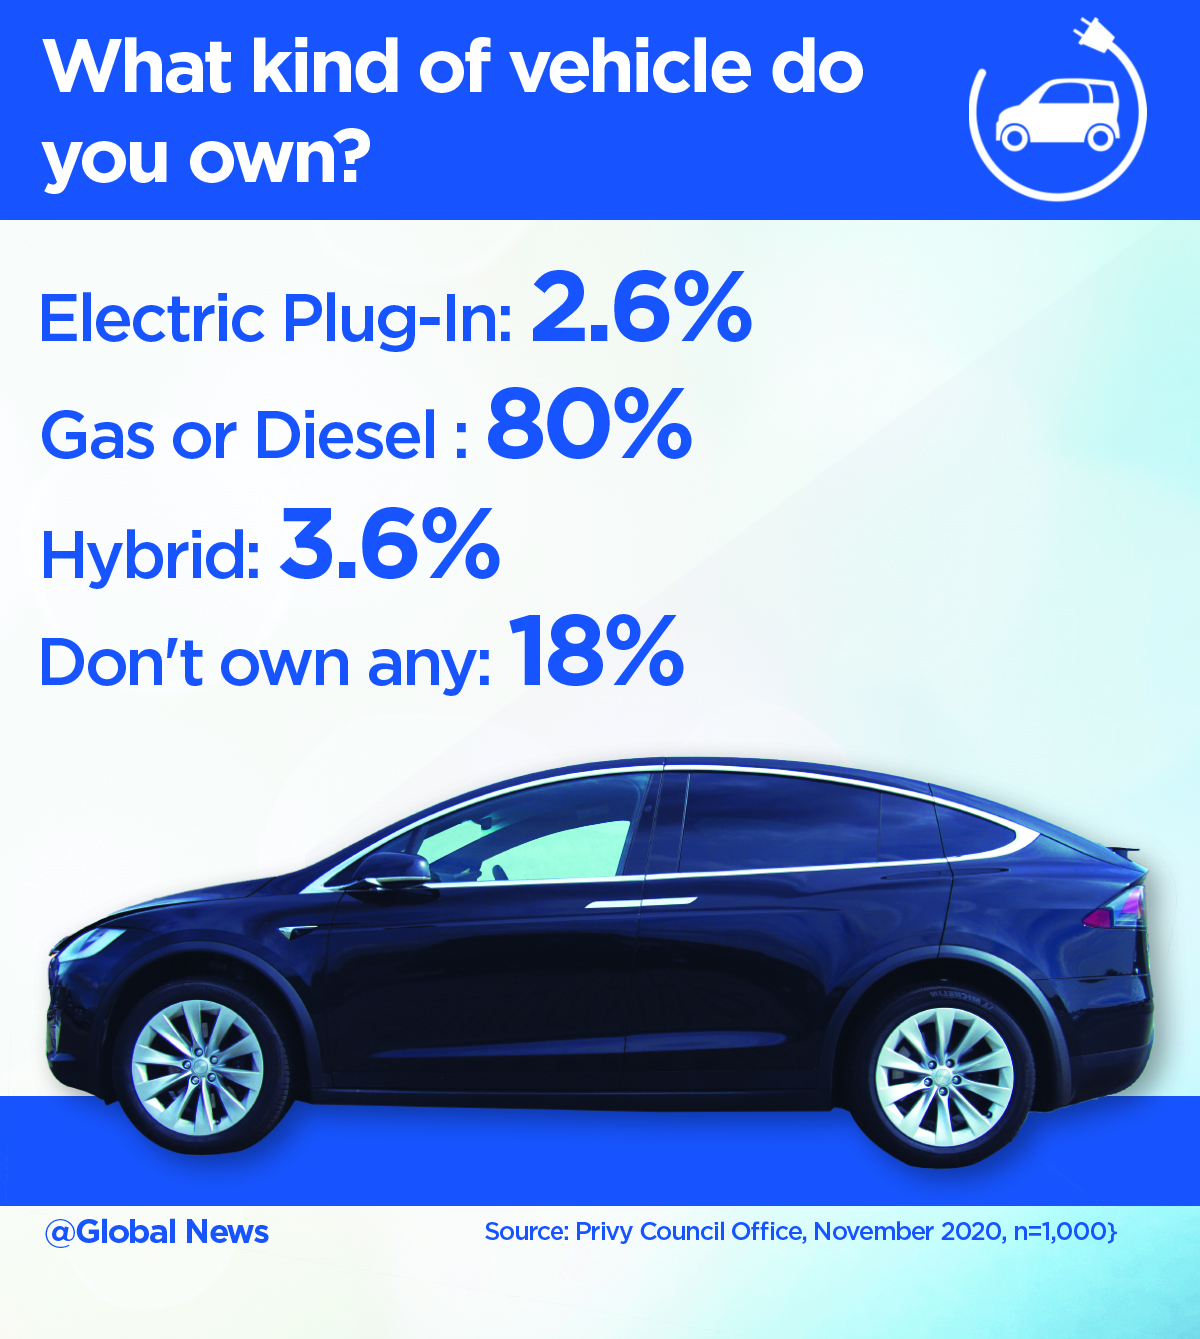 Internal government poll shows strong support for electric vehicle